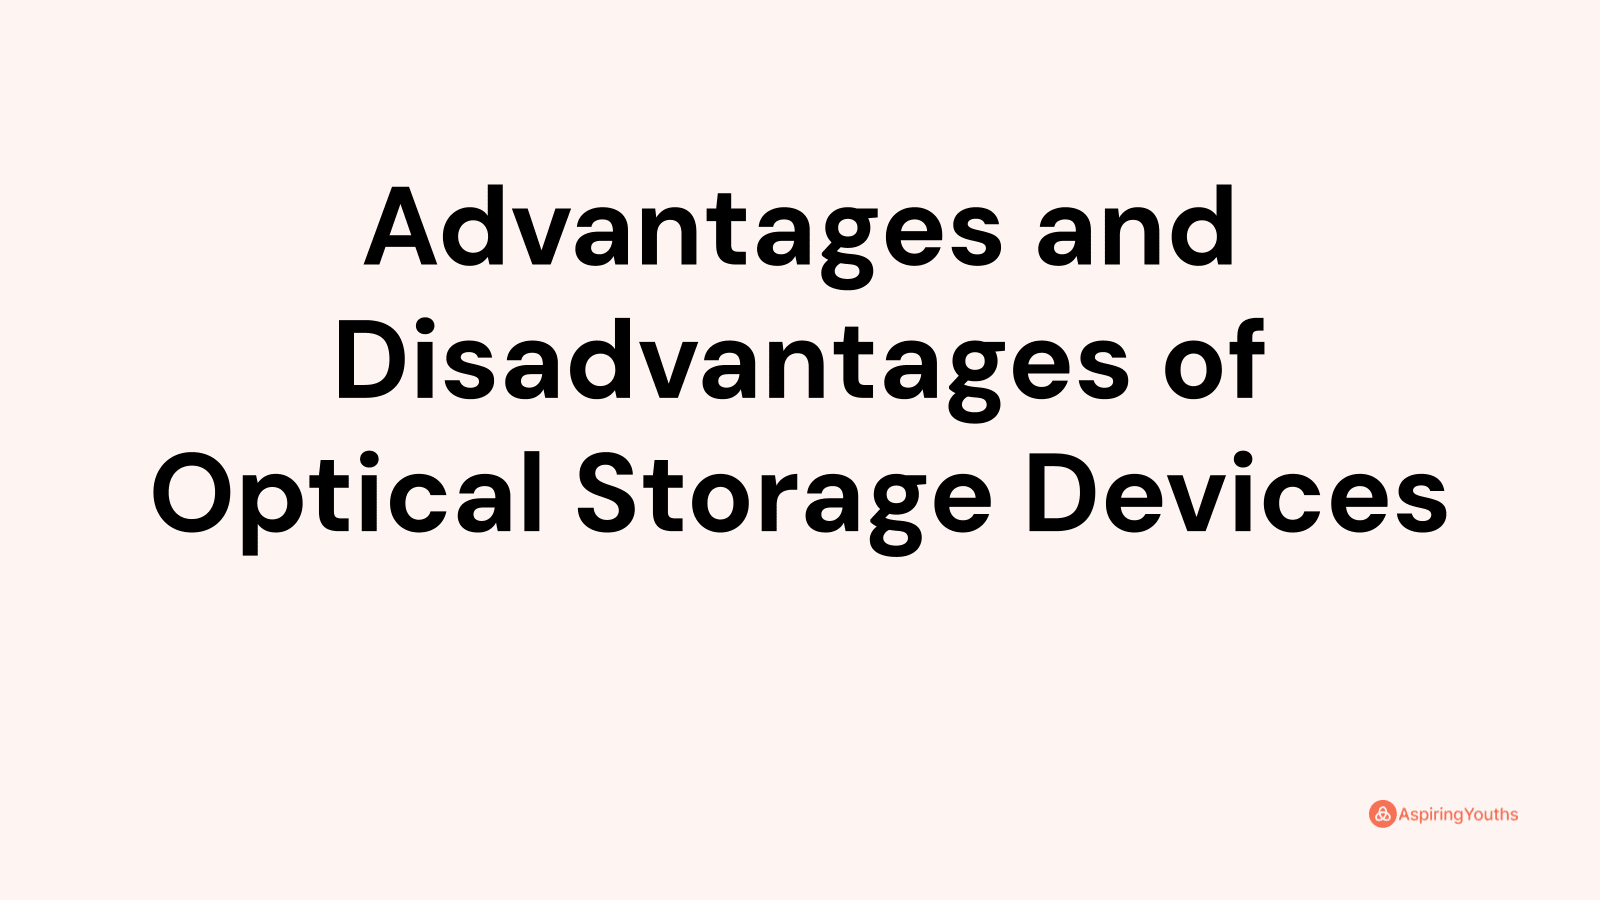 Advantages and disadvantages of Optical Storage Devices